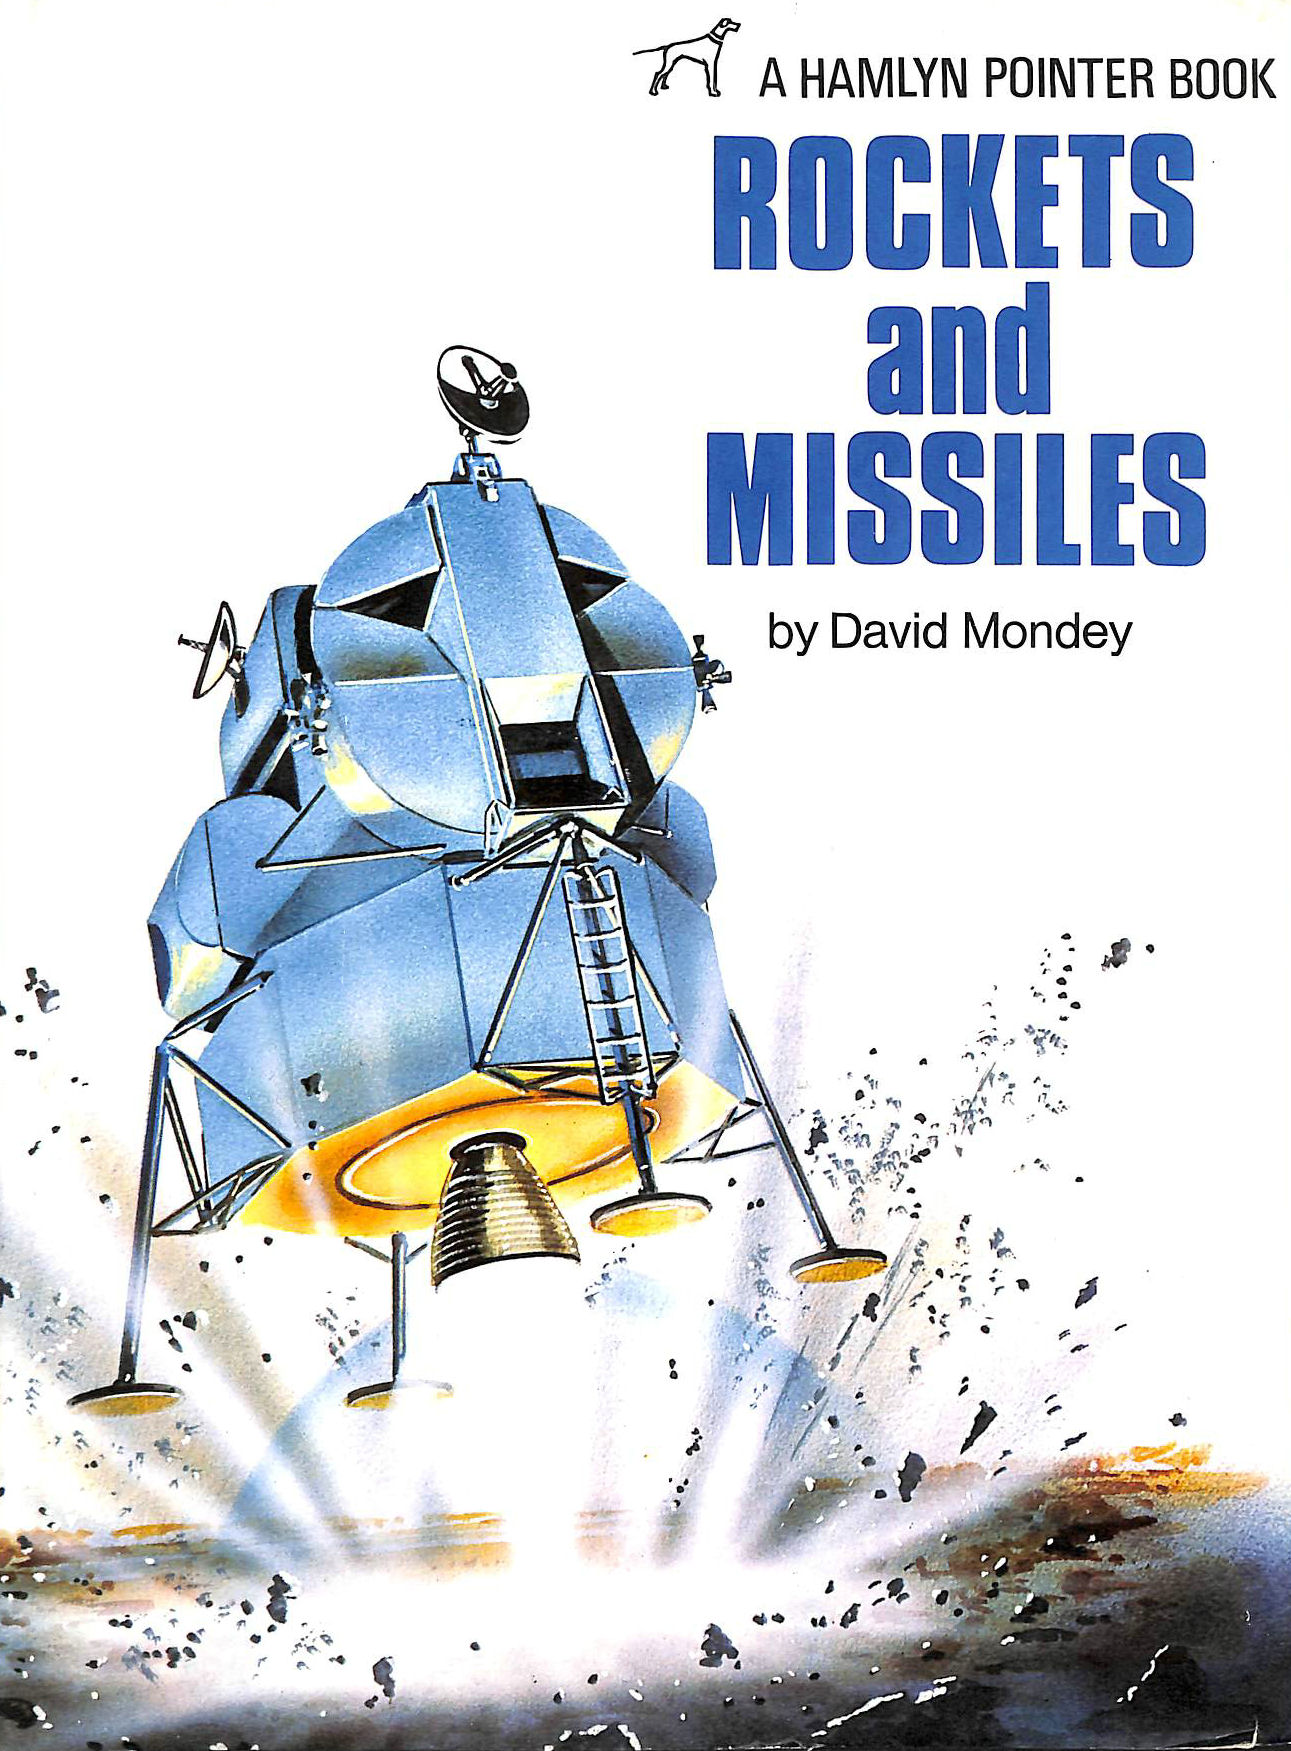 MONDEY, DAVID - All About Rockets and Missiles (Pointer Books)